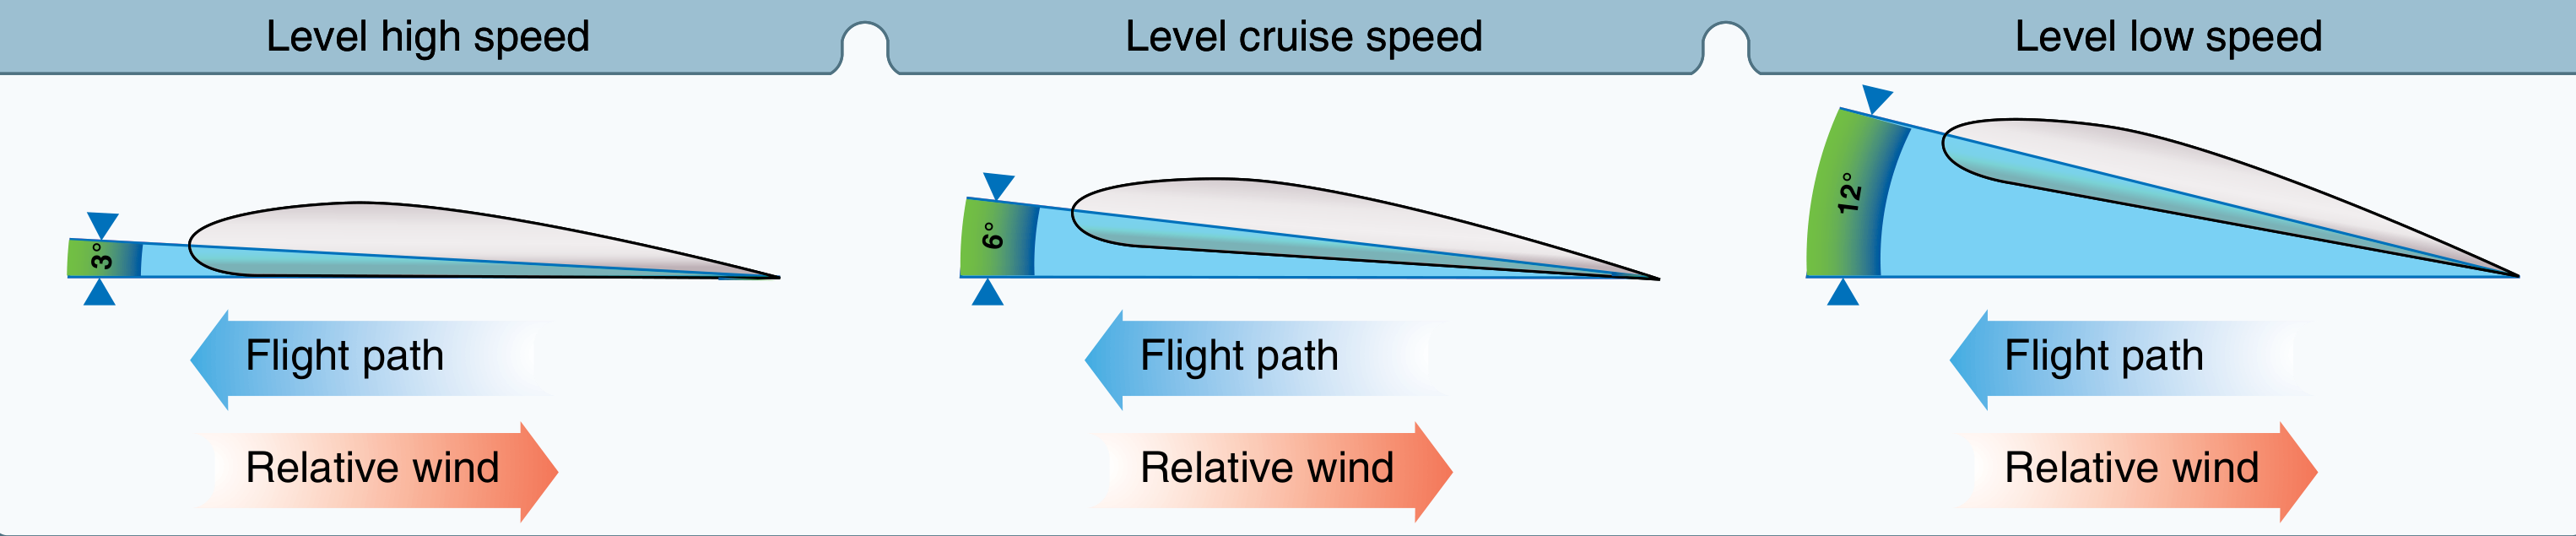 Angle of attack at various speeds.